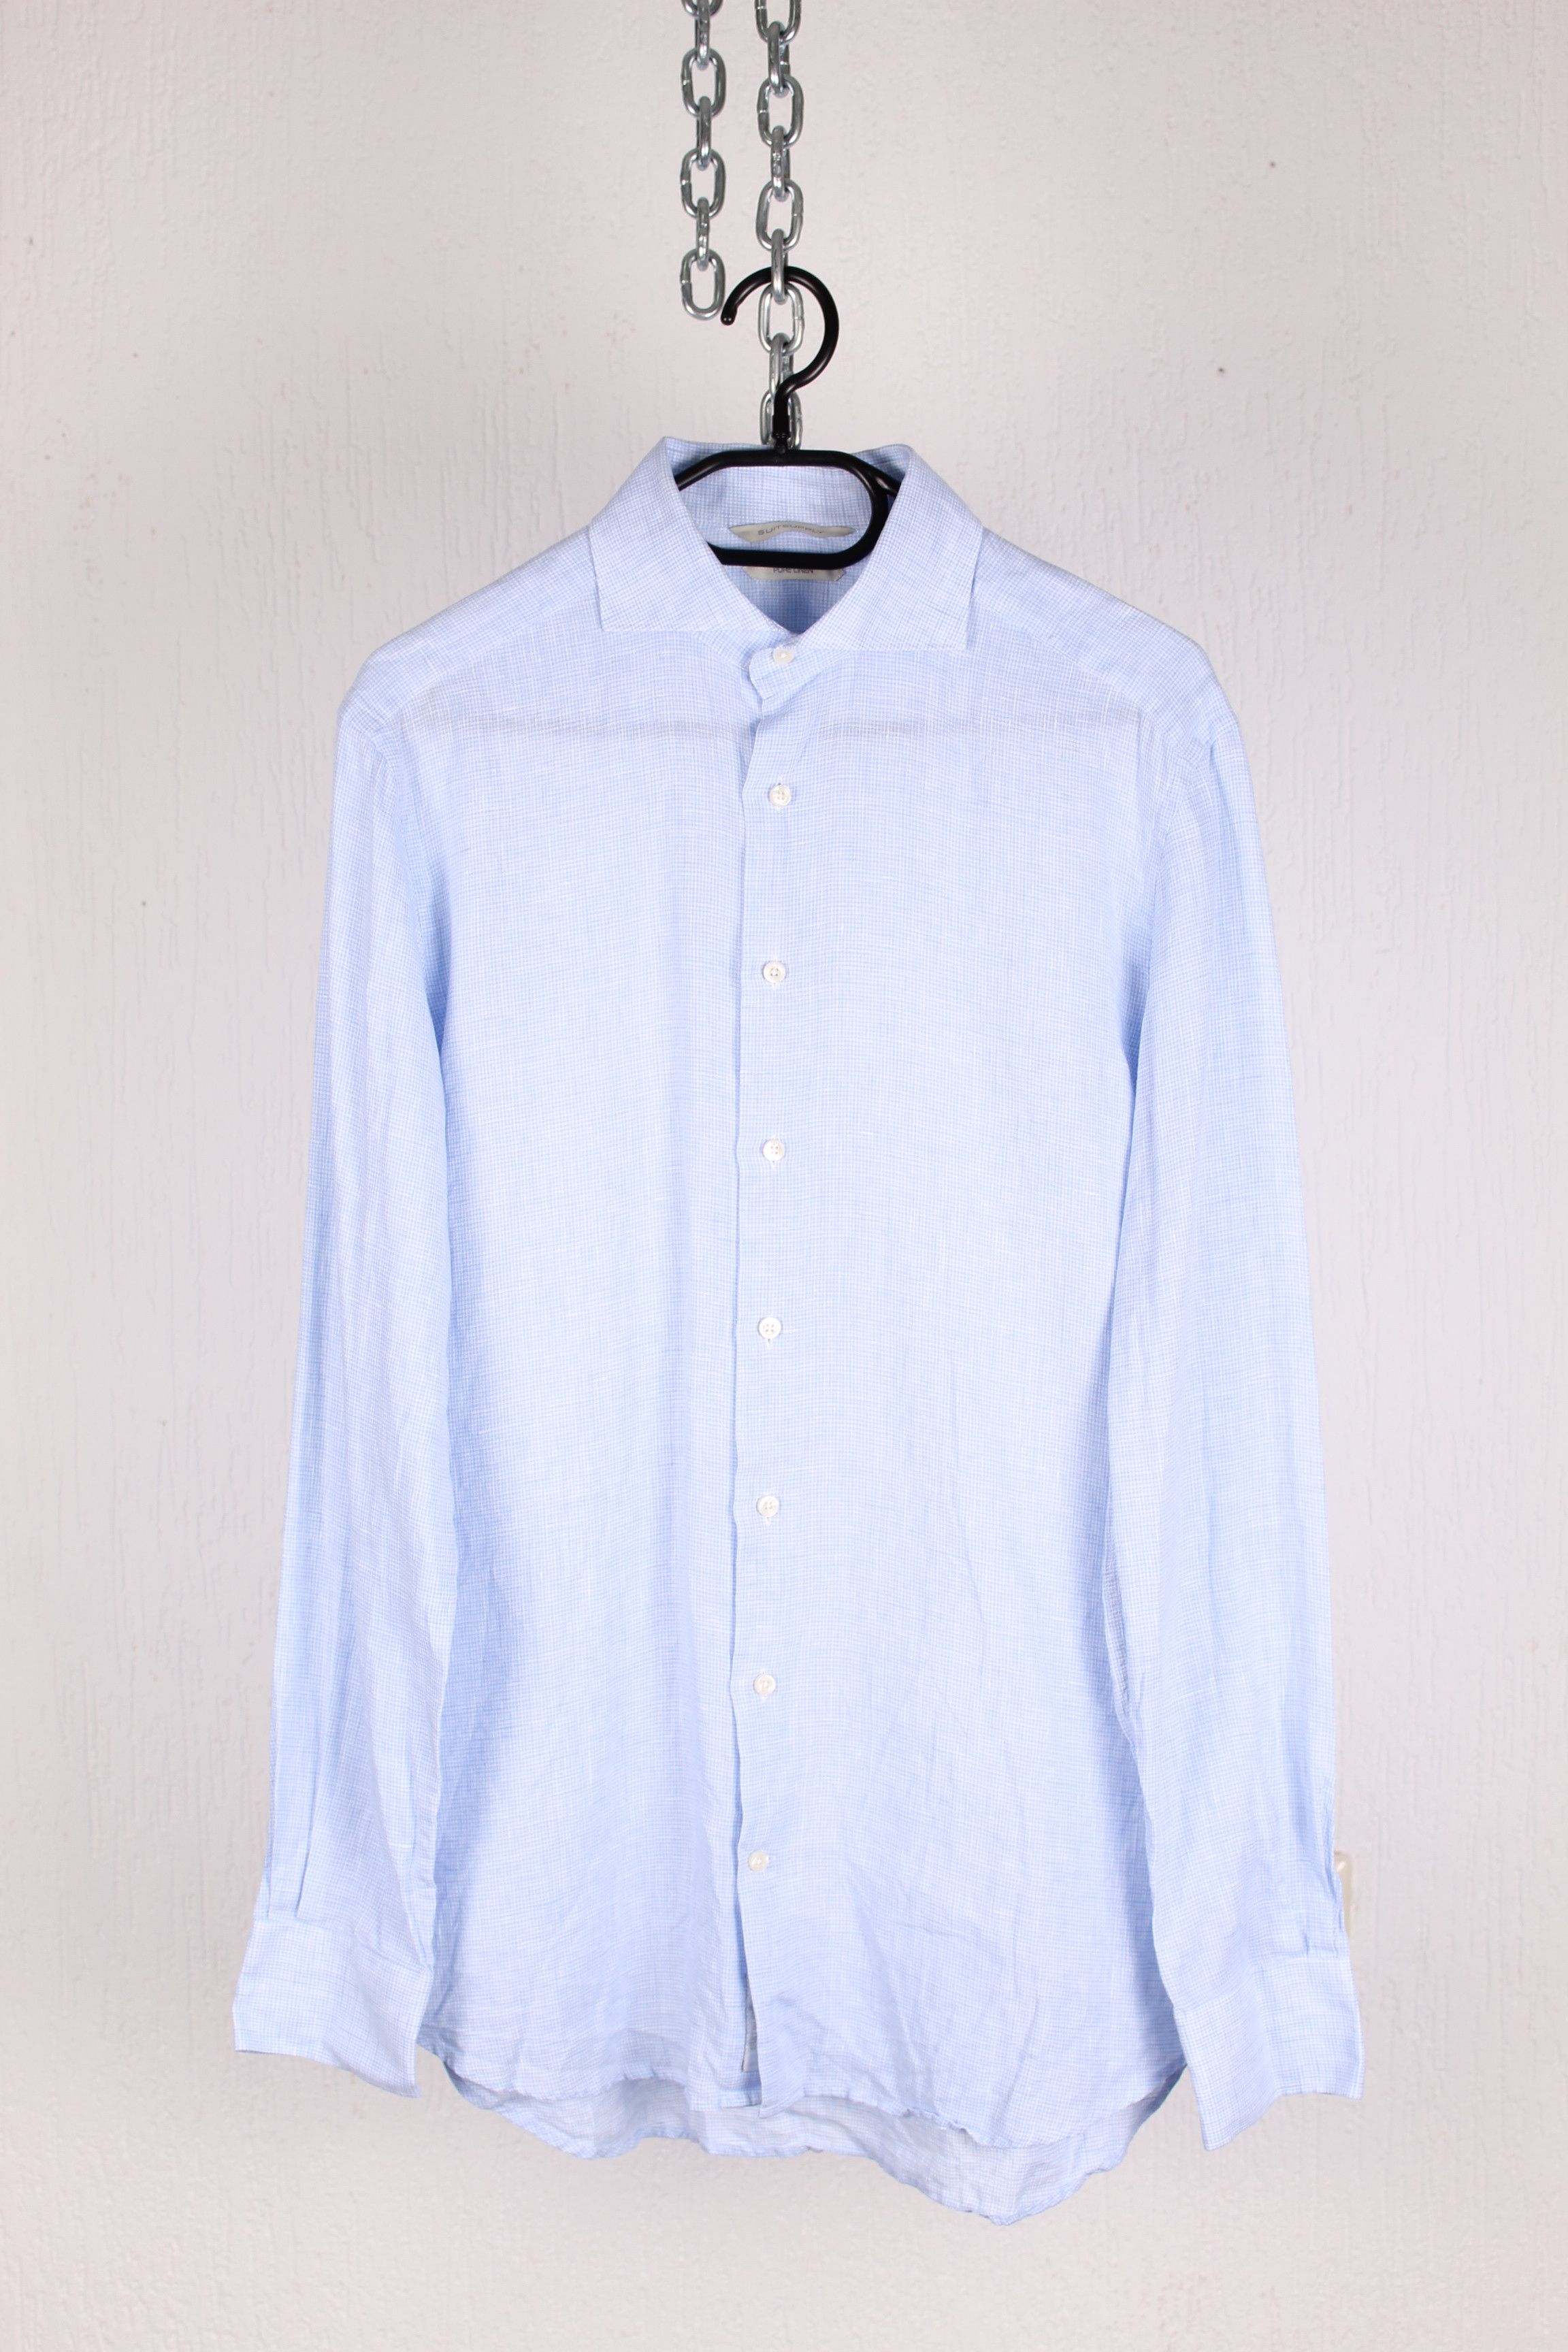 Suitsupply Suitsupply Linen Shirt | Grailed